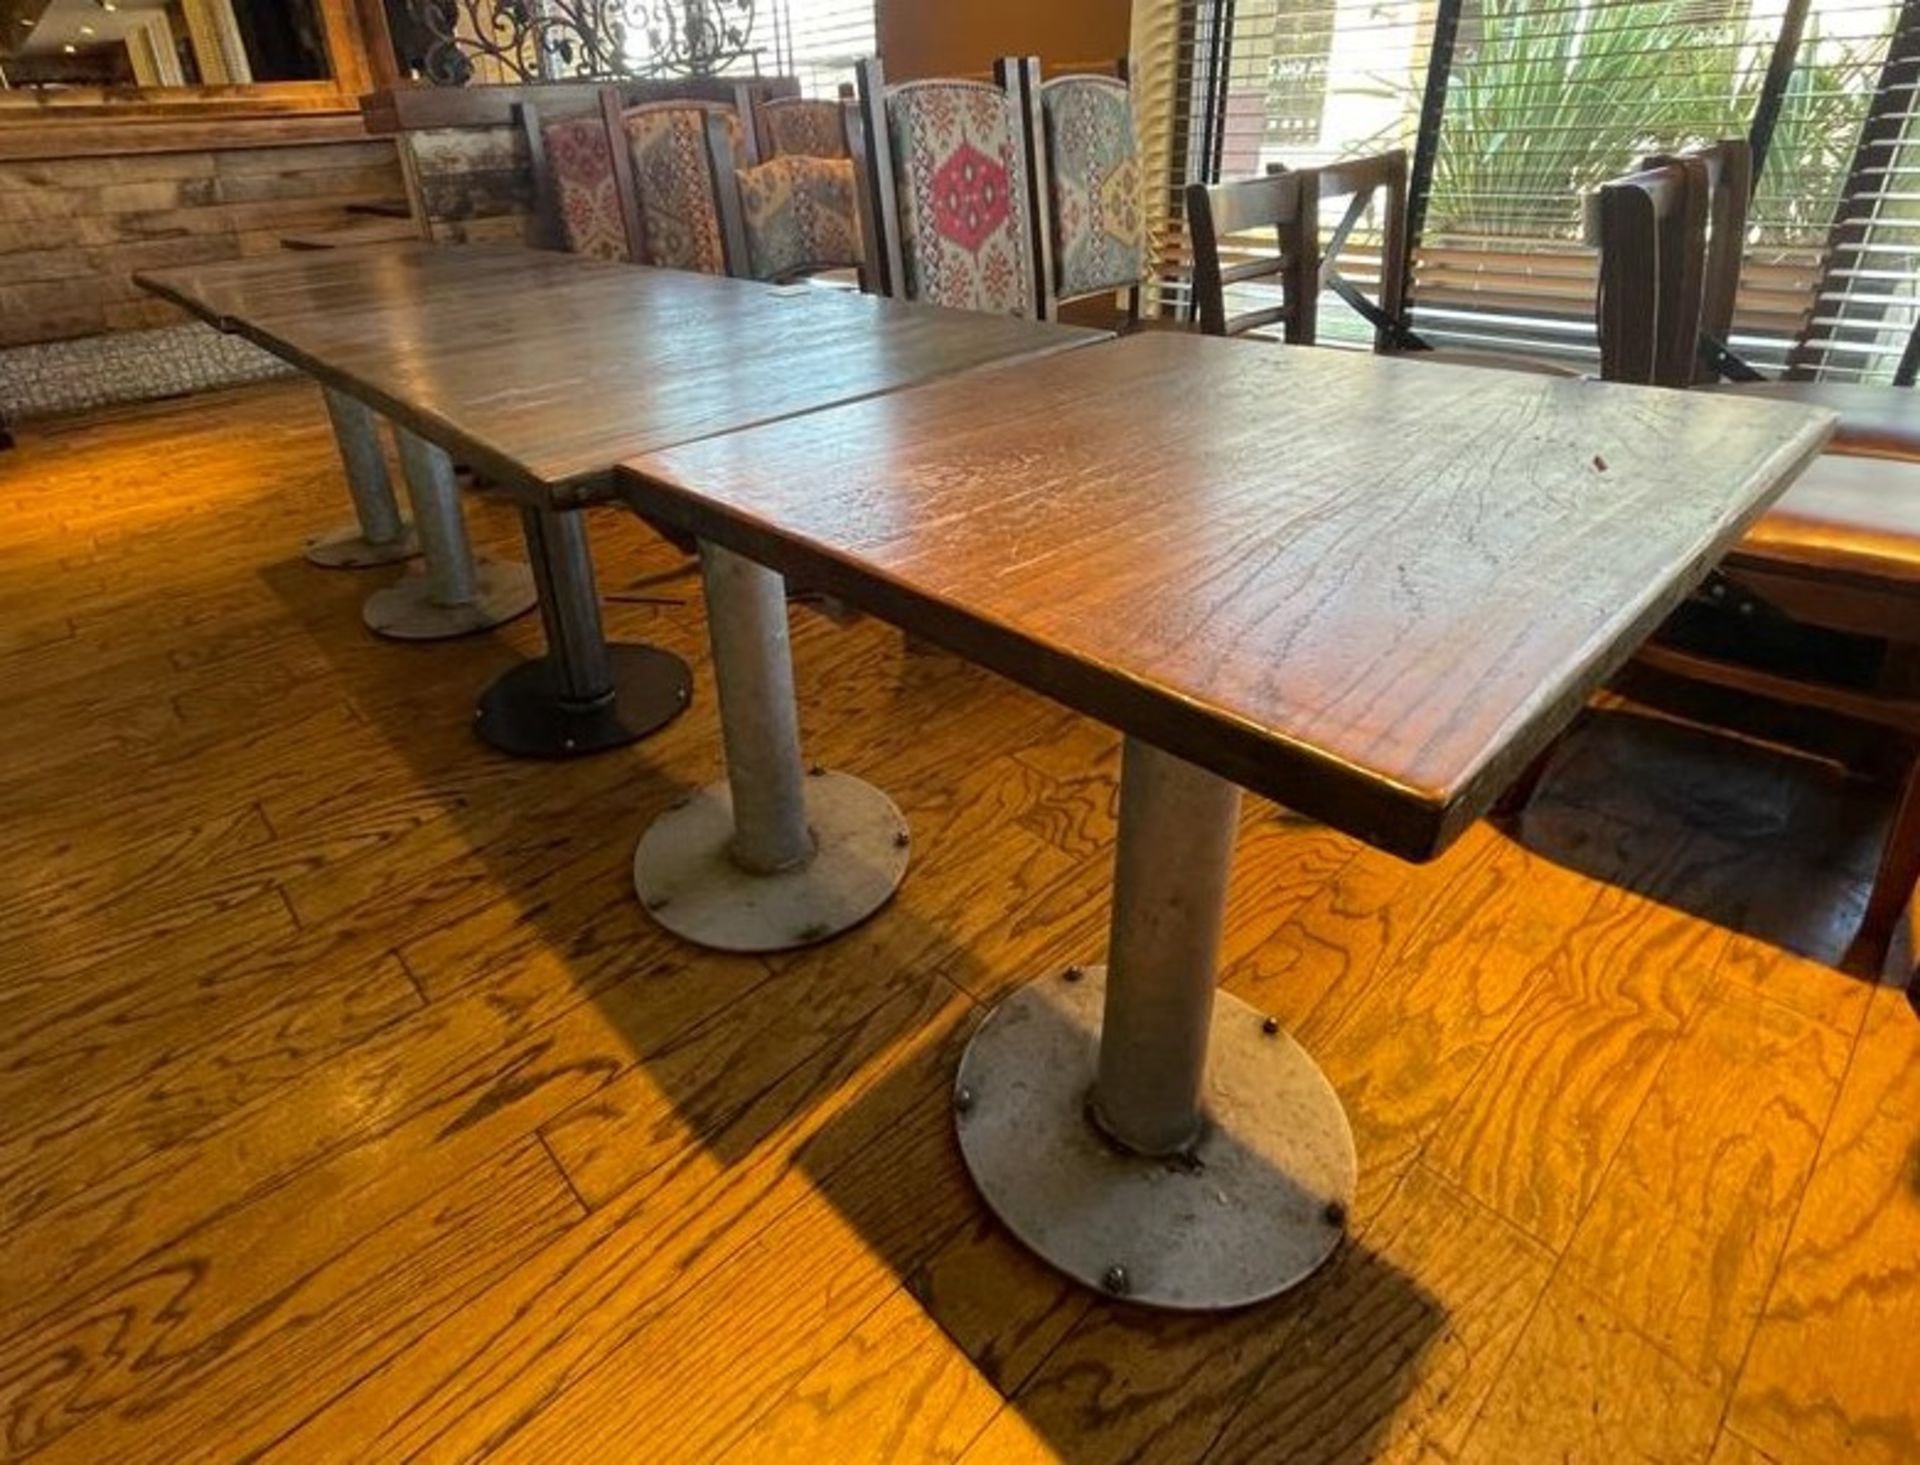 6 x Restaurant Dining Tables Featuring Industrial Style Bases and Wood Tops - Dimensions: H73 x - Image 5 of 9